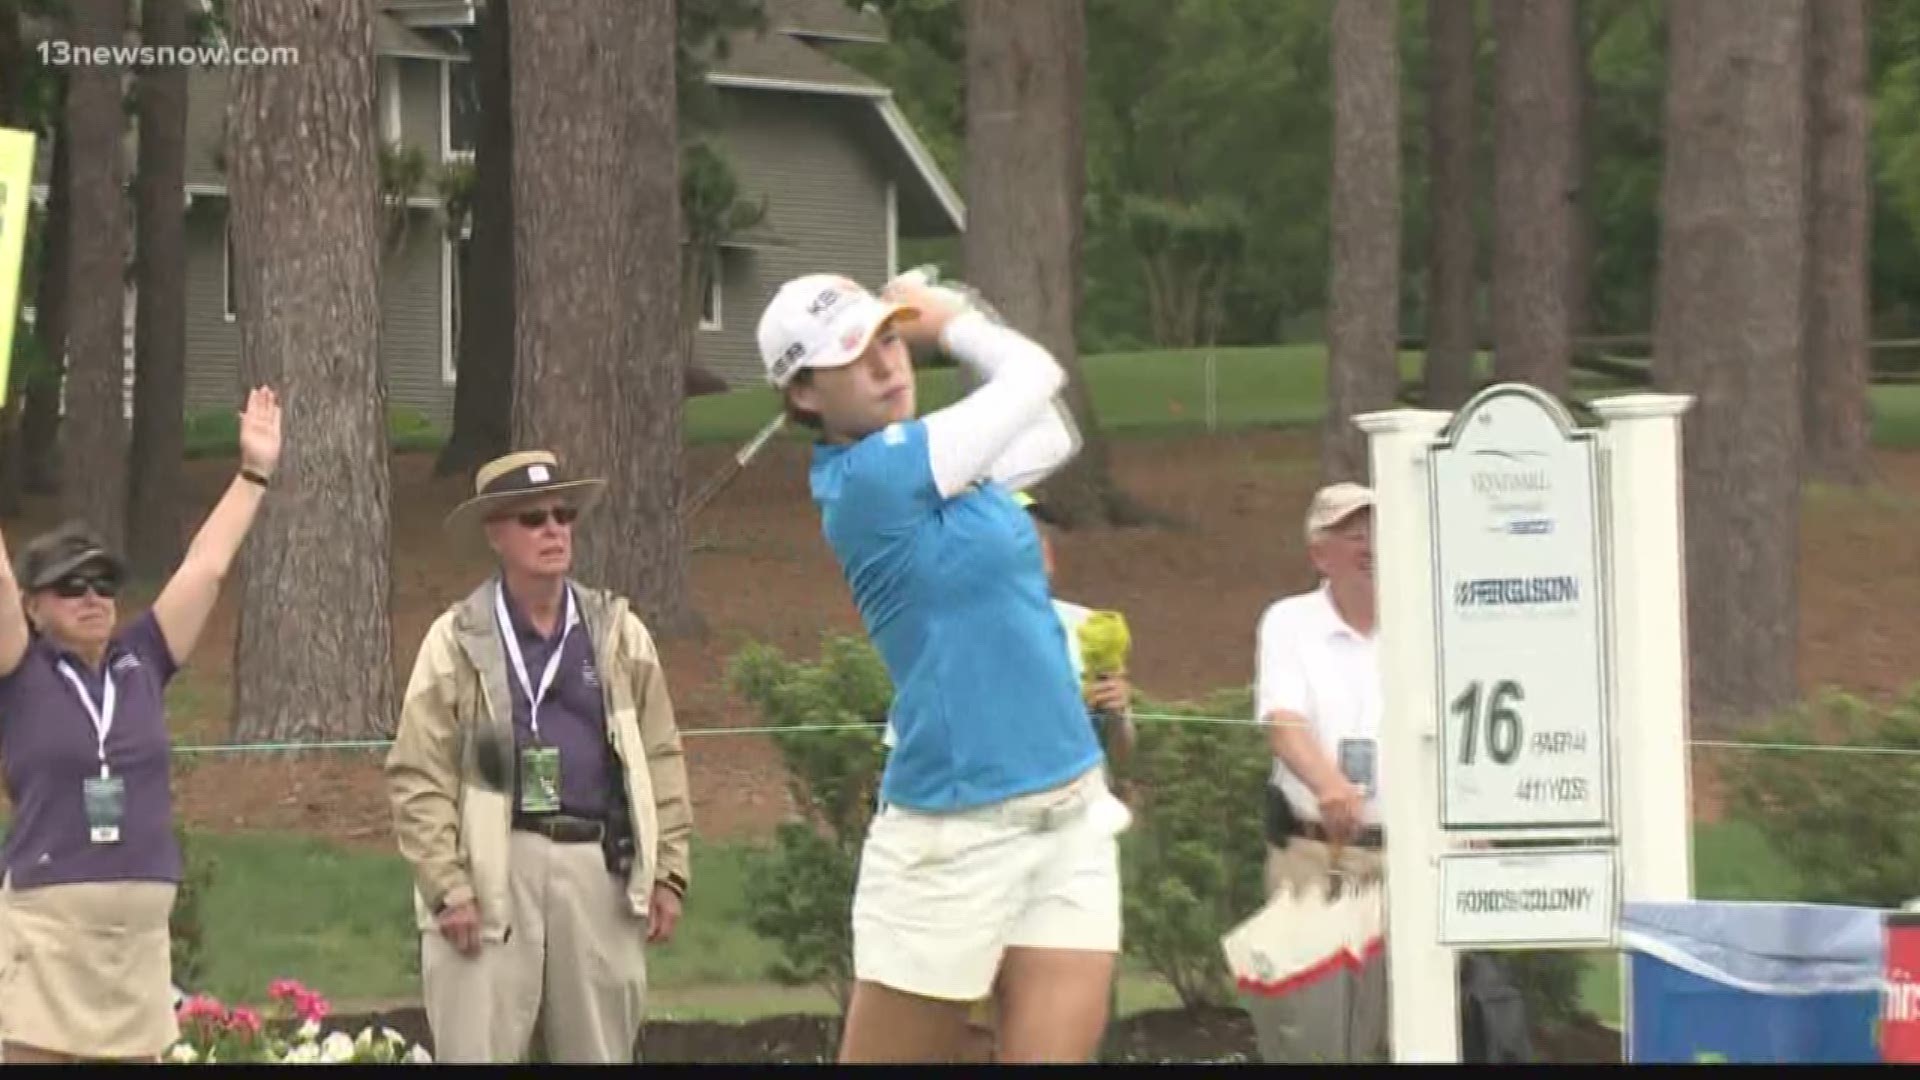 13 Sports Director, Scott Cash has a recap of the 2nd round from the LPGA Tour stop at Kingsmill.